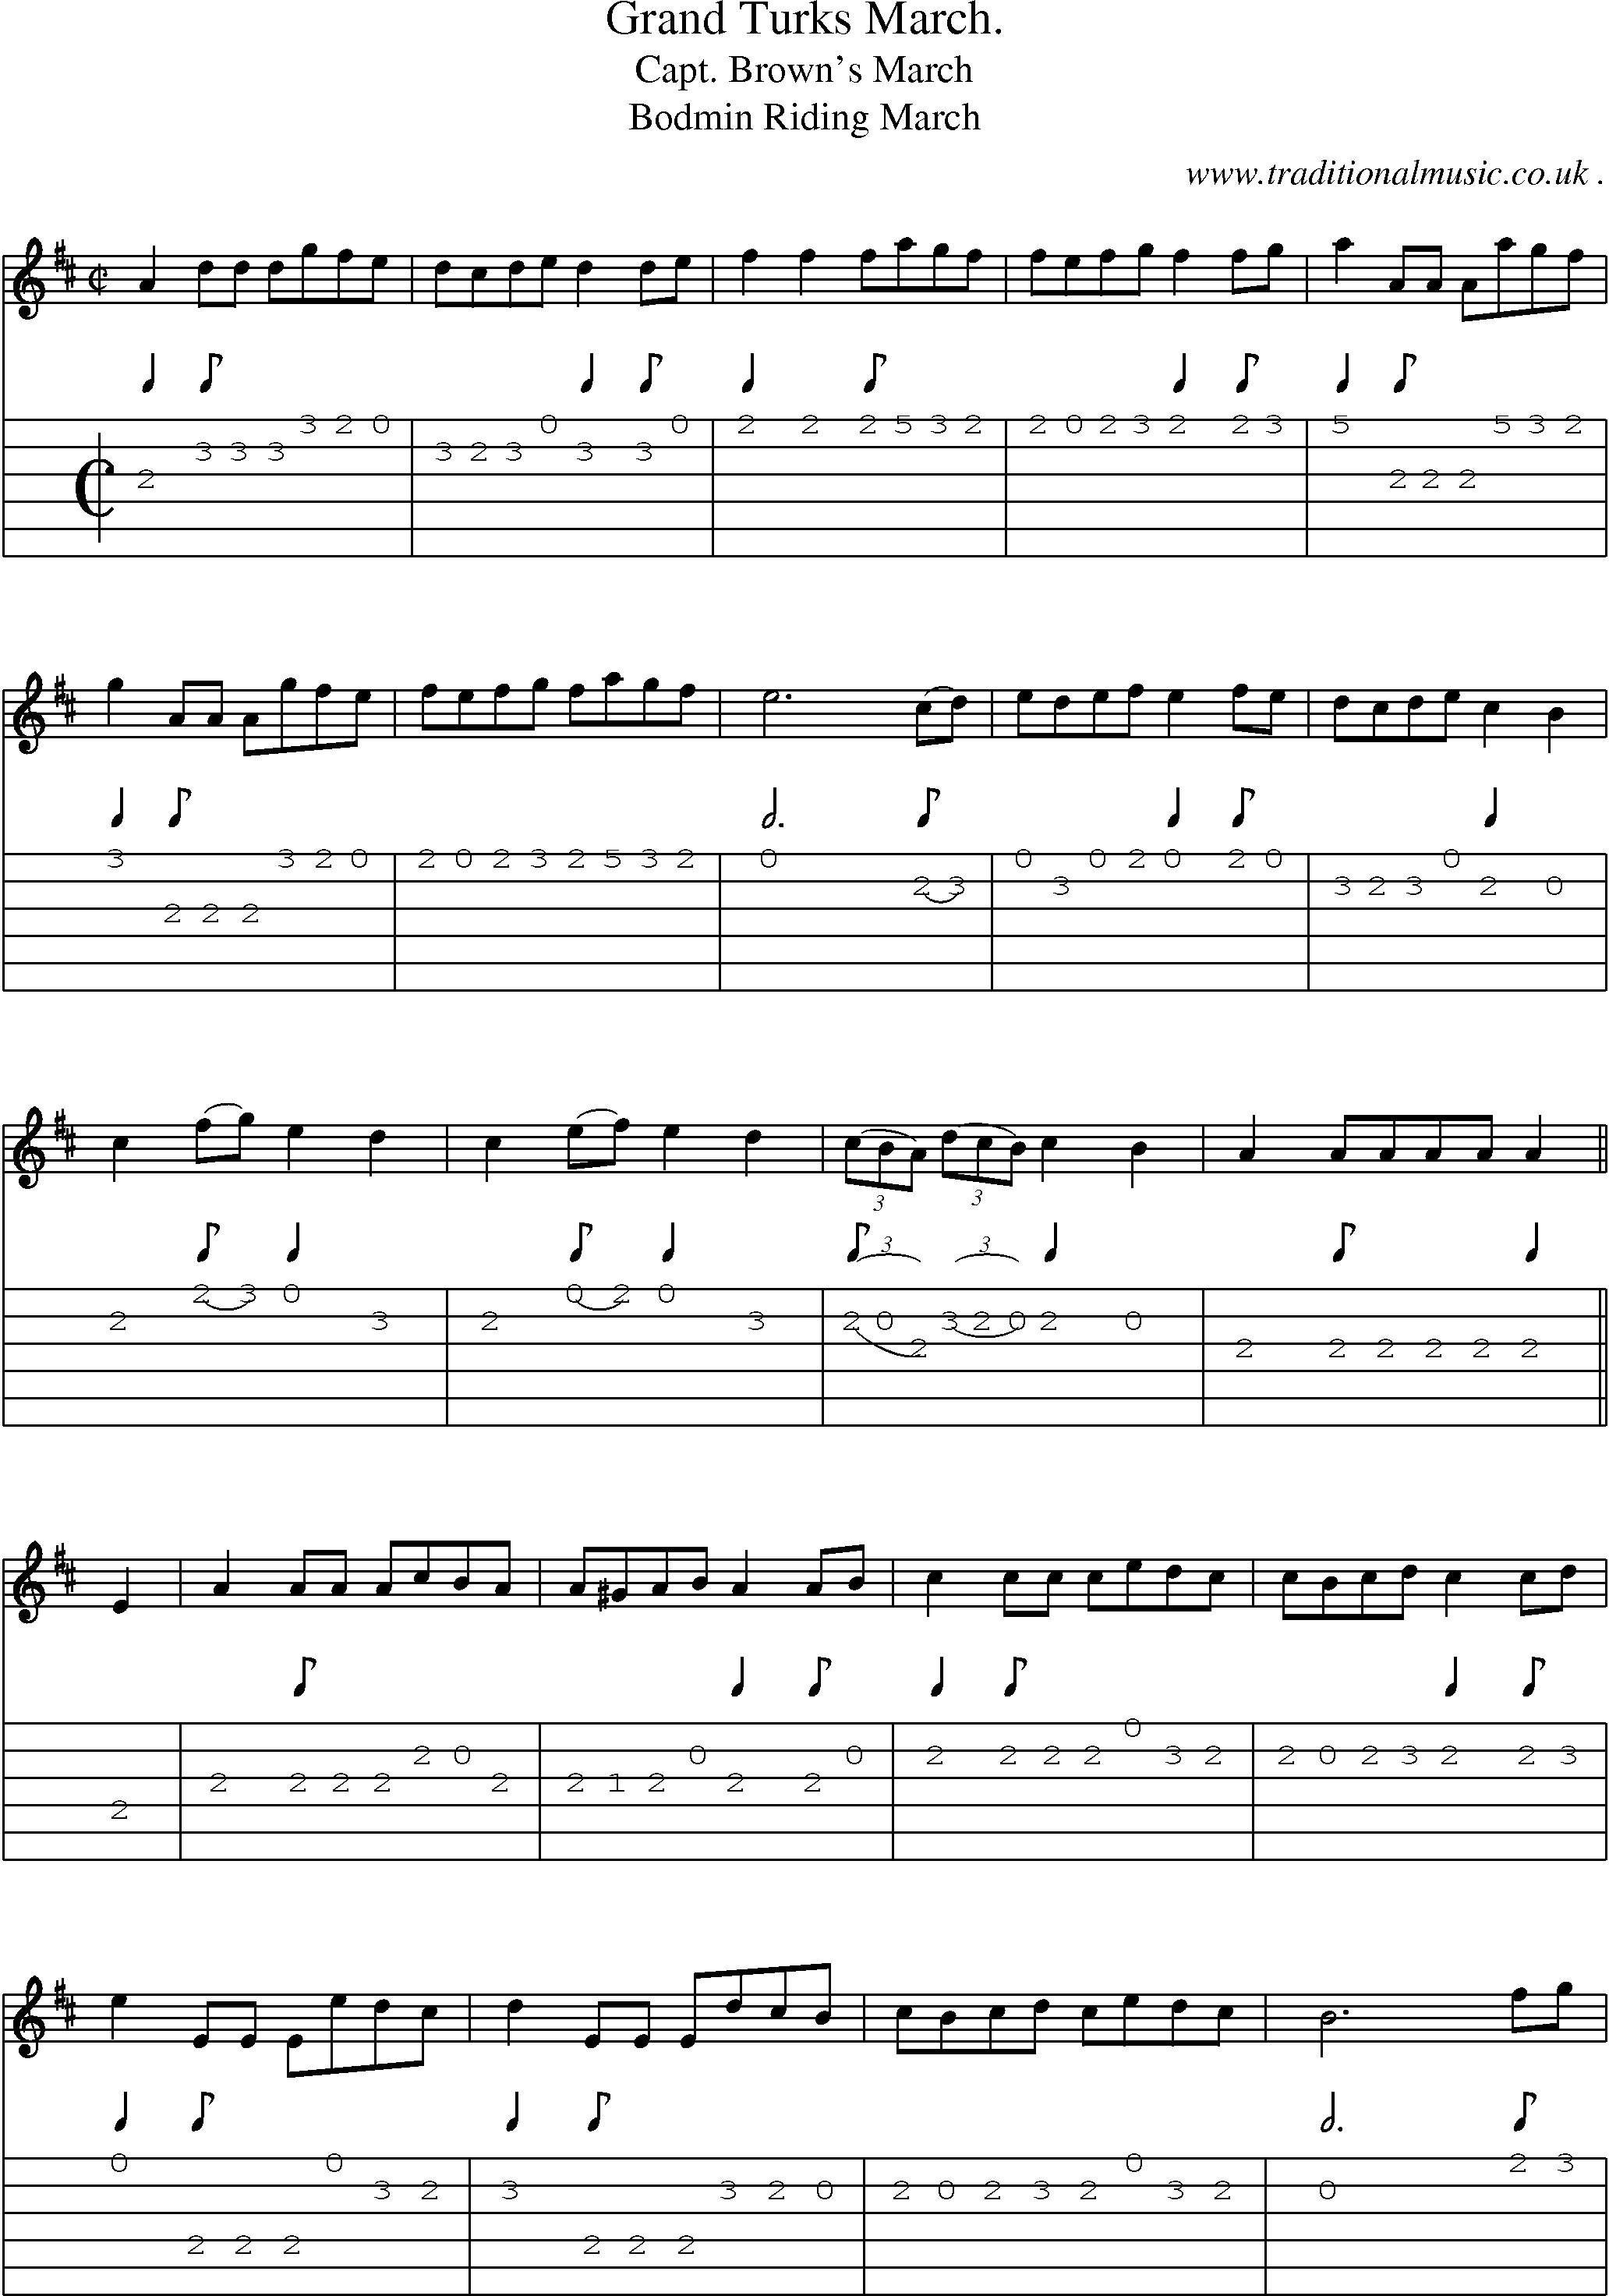 Sheet-Music and Guitar Tabs for Grand Turks March